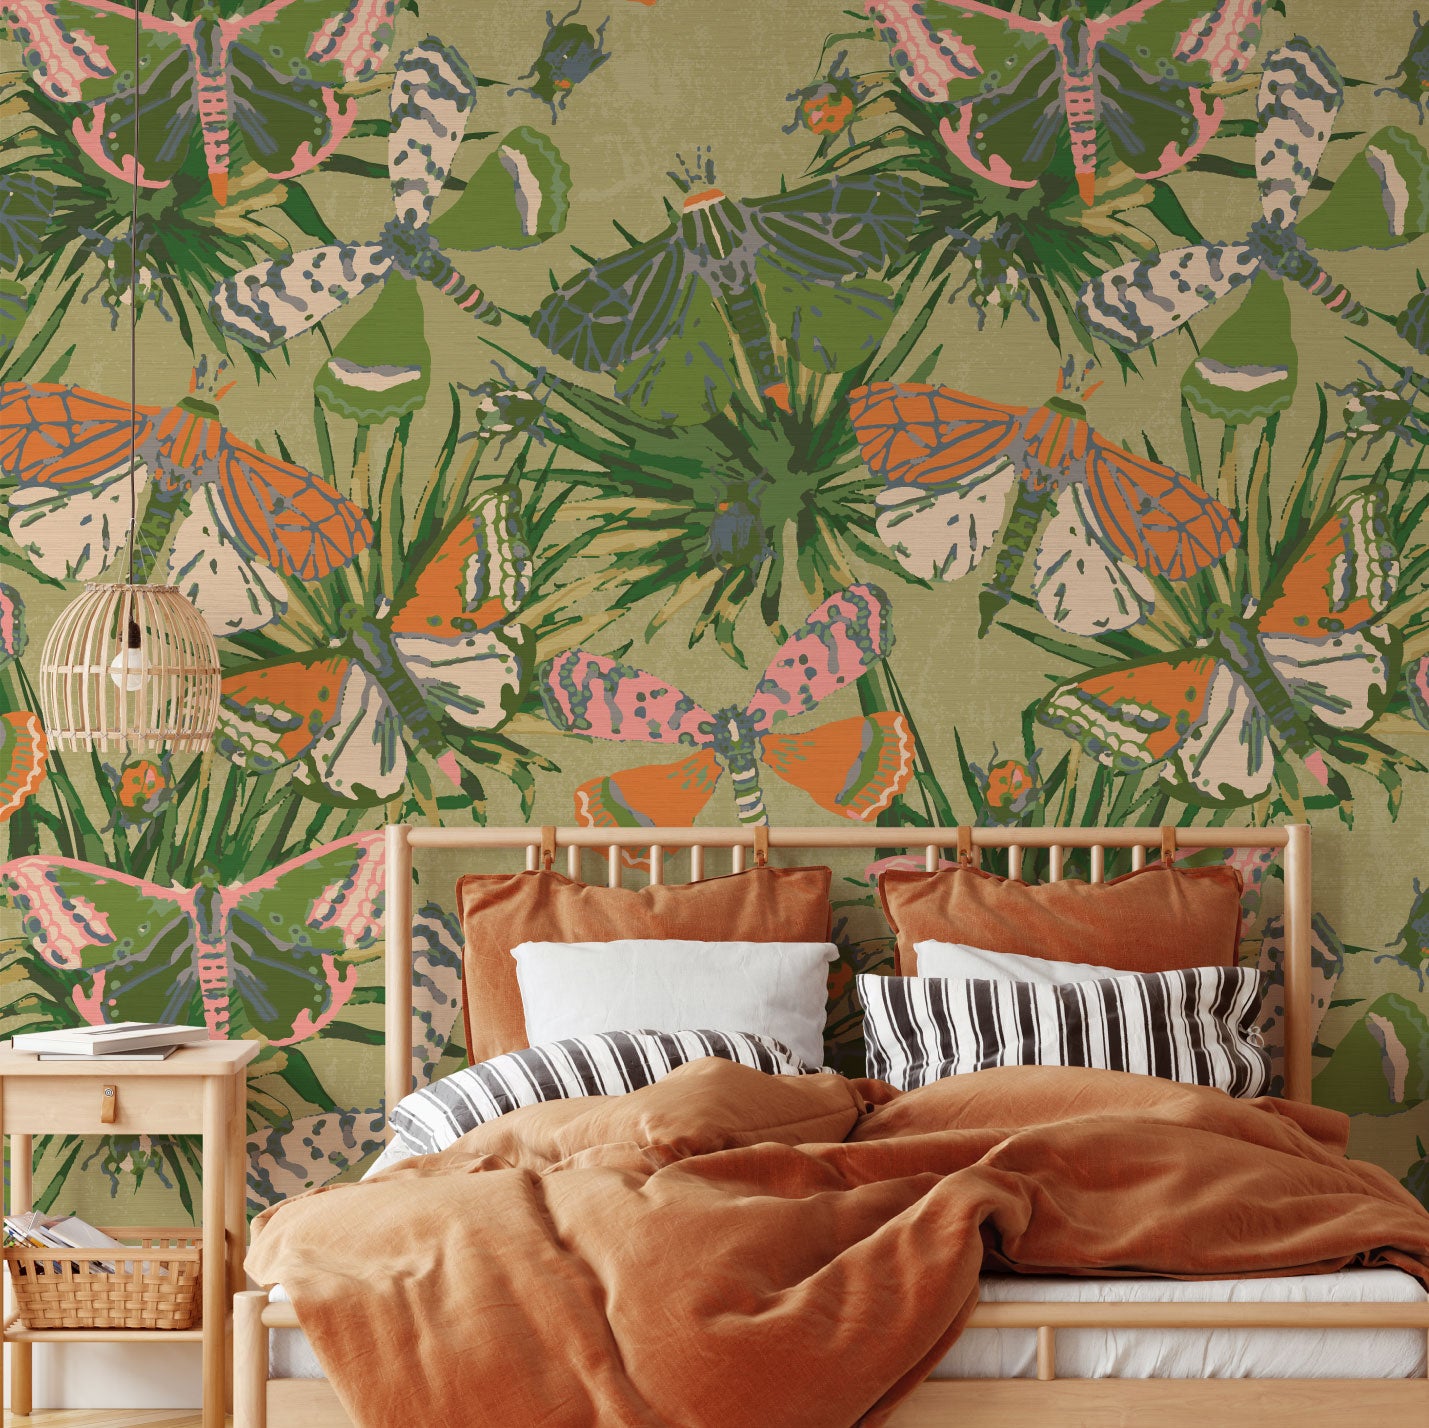 Grasscloth printed wallpaper with dusty olive green base and subtle tonal palm prints in shades of green as base print with oversized multi colored butterflies layered on top in oversized scale. Butterflies are designed using a range of dusty pink, orange, turquoise, royal blue and cream